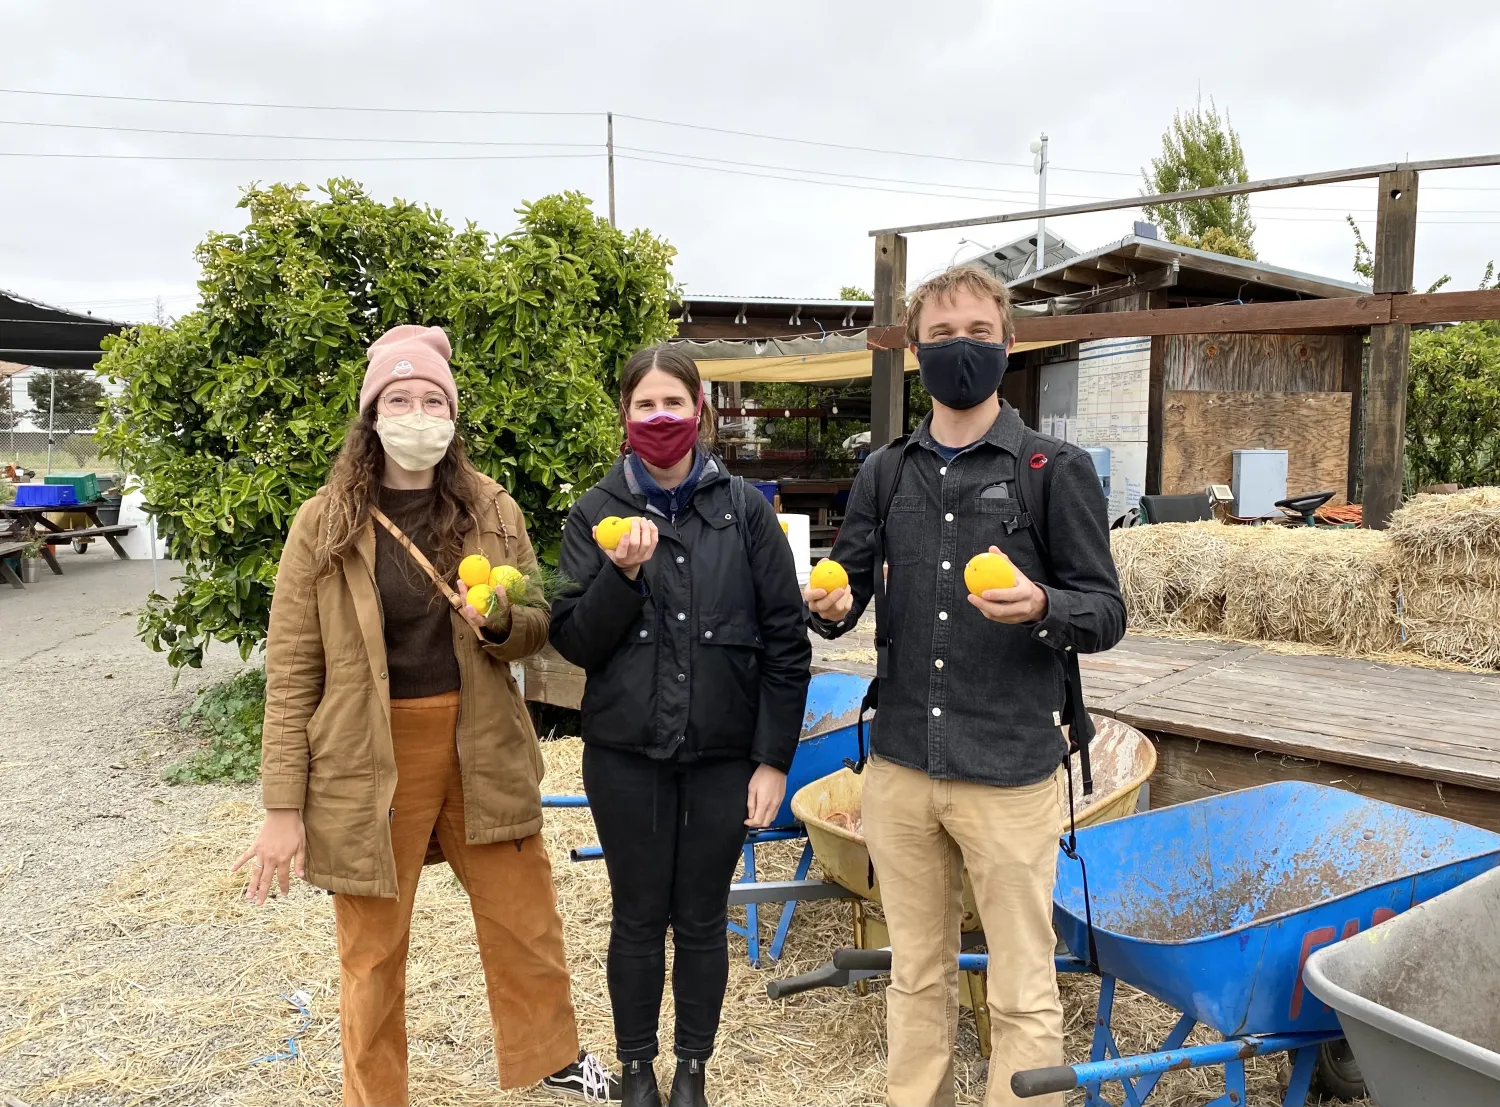 DBA staff holding lemons at the site visit for Farm2Market Shade Trellis in Alameda, California.